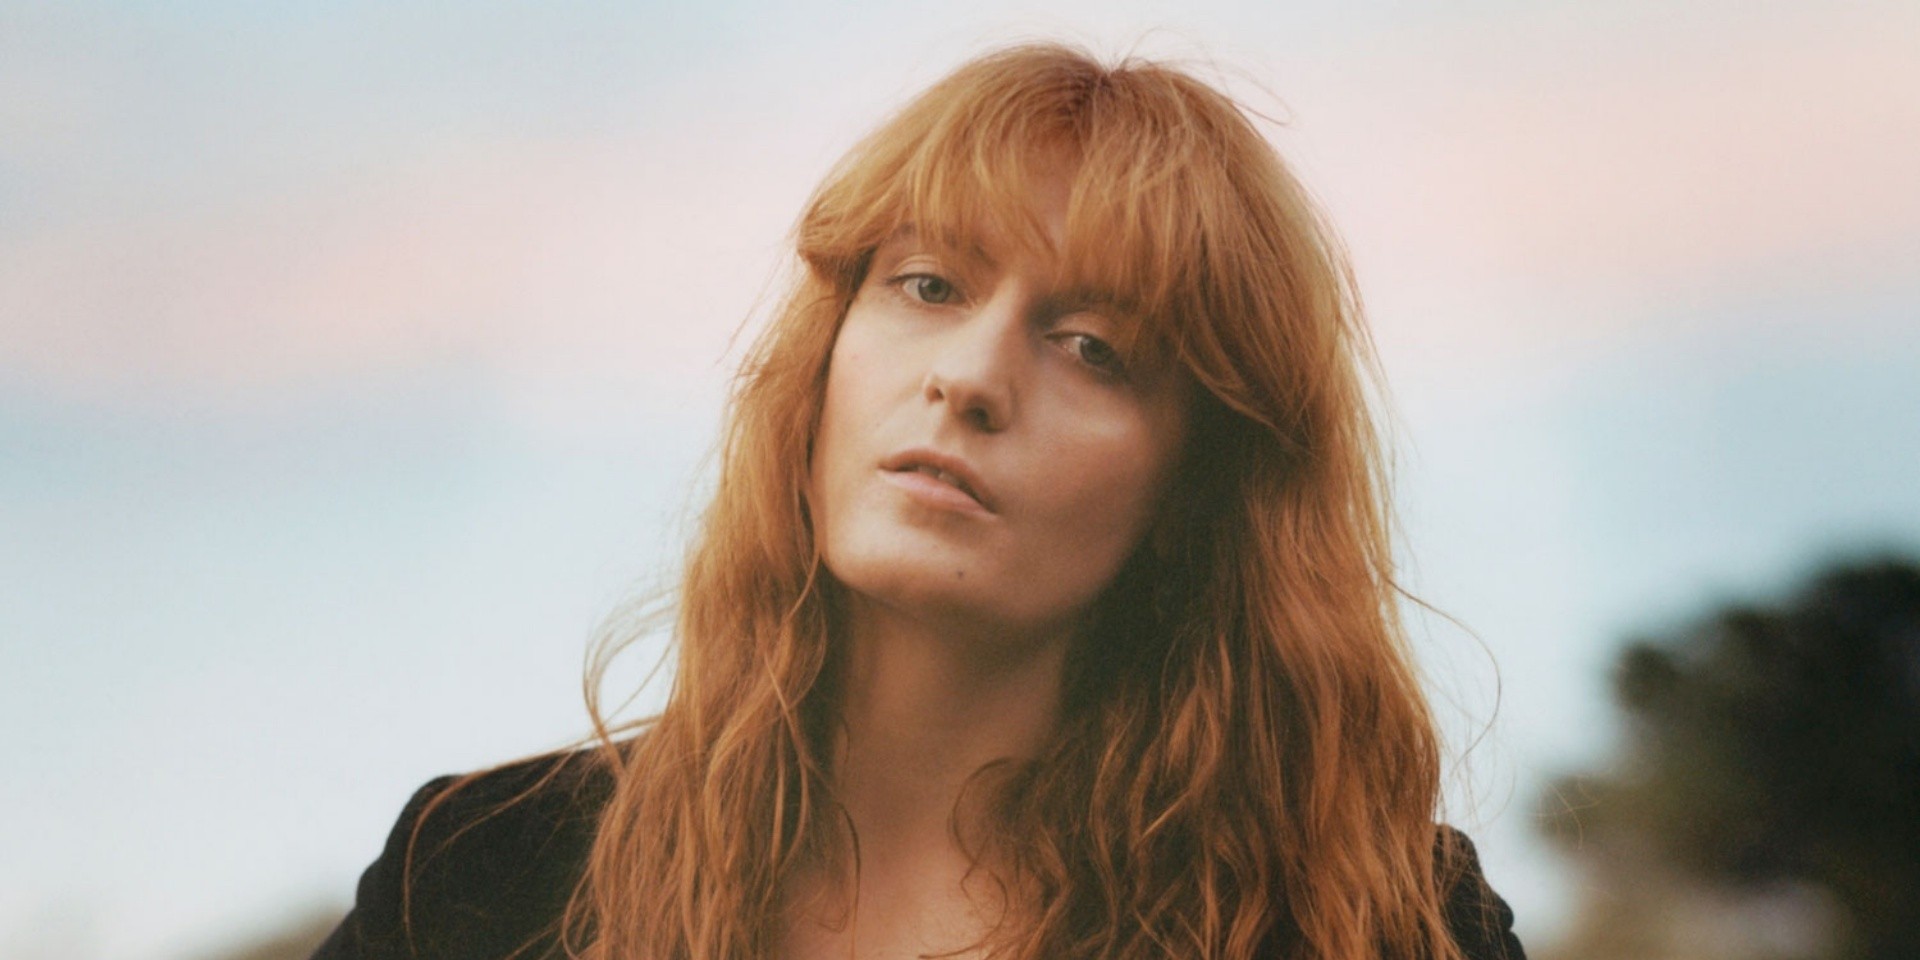 Florence + The Machine shares two new tracks 'Moderation' and 'Haunted House' – listen